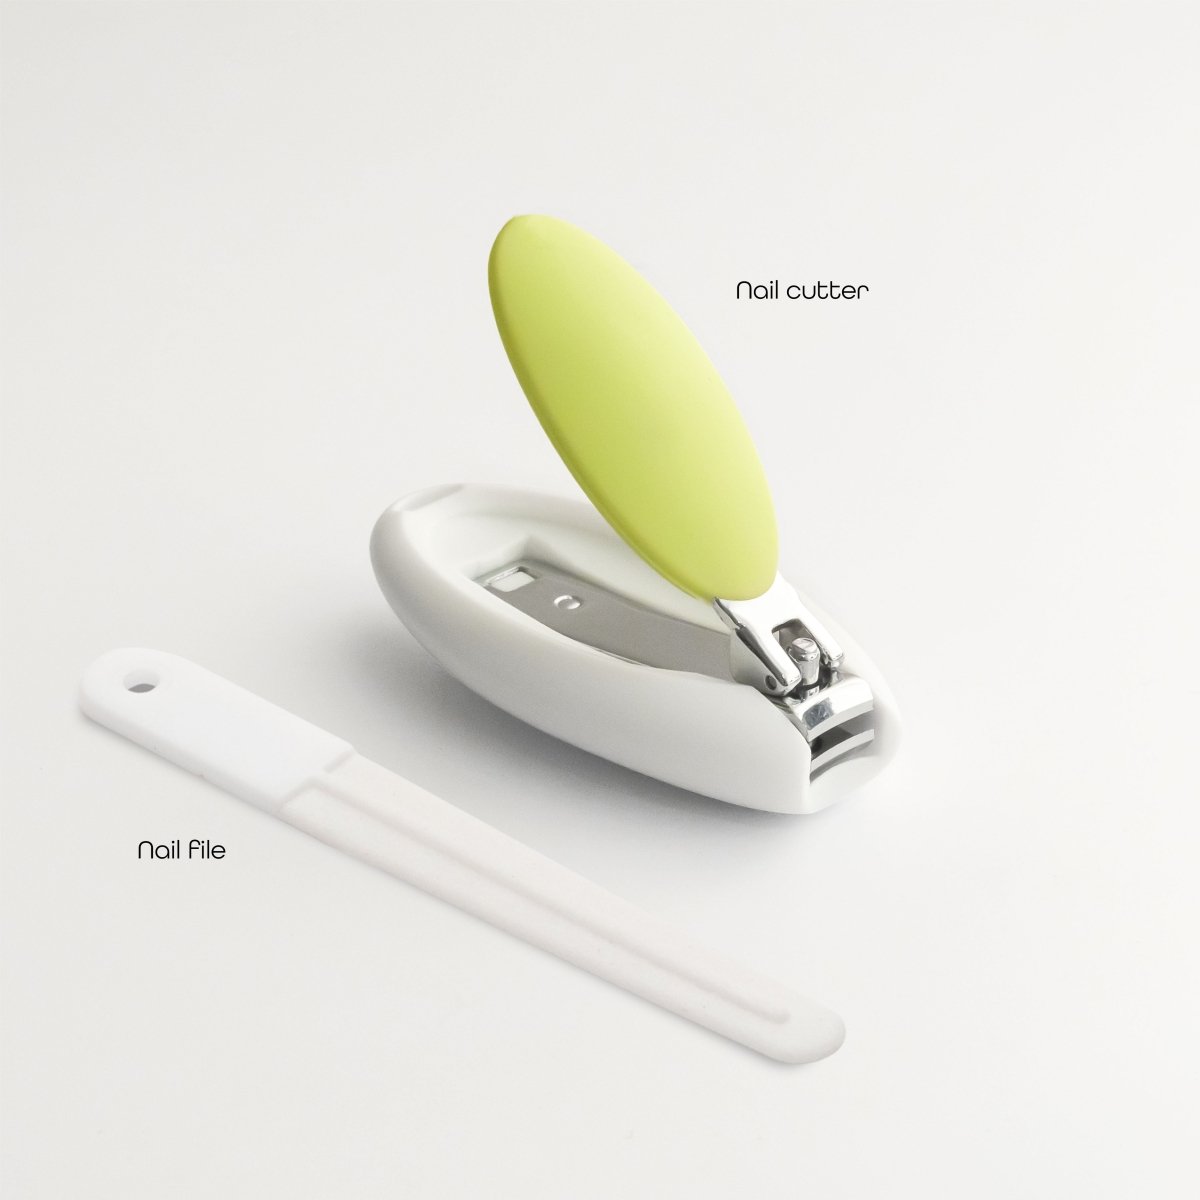 Moon Nail Clipper & File Grooming White & Green